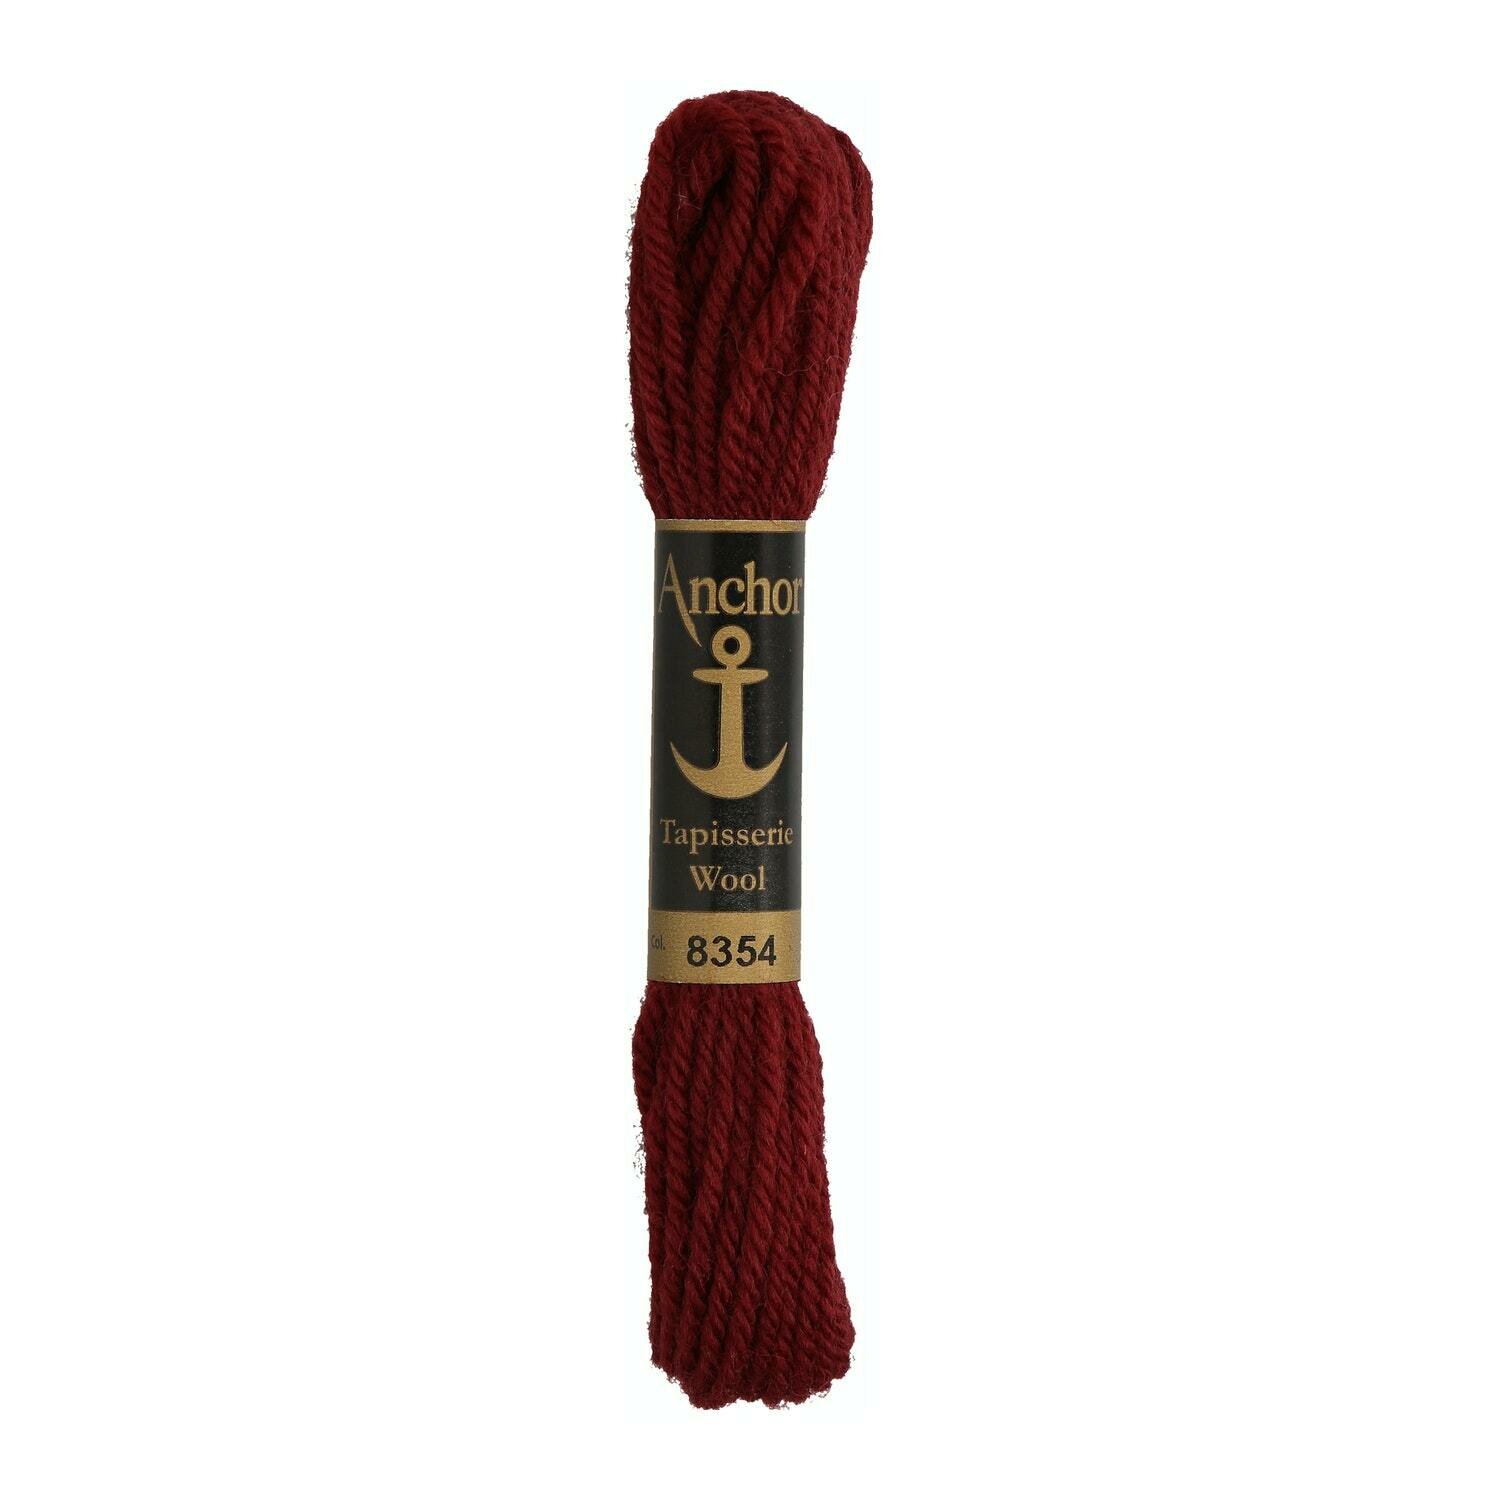 Anchor Tapisserie Wool #  08354